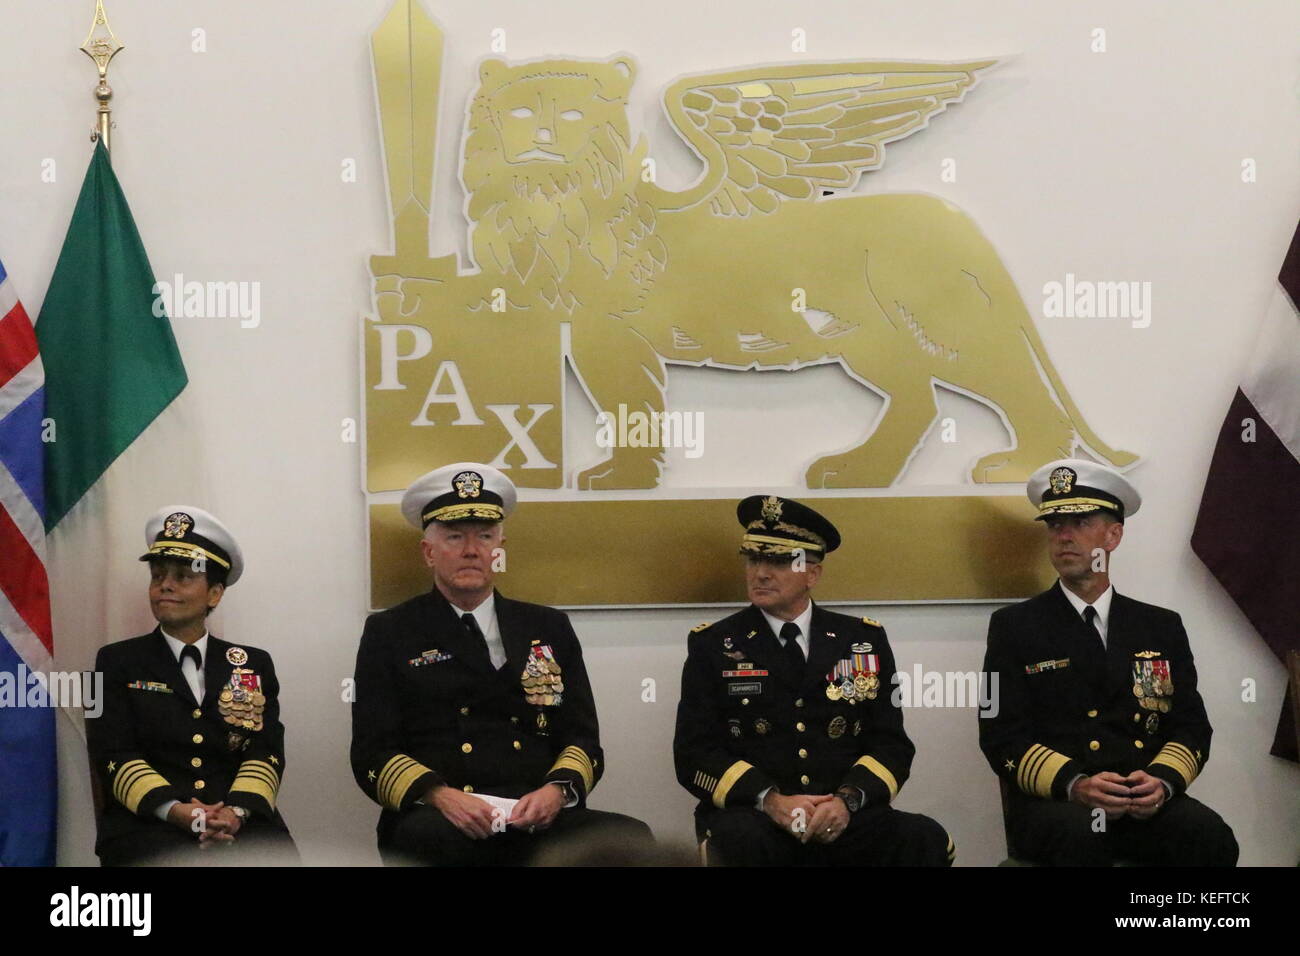 Giugliano In Campania, Italy. 20th Oct, 2017. Military Ceremony 'Command Exchange' at JFC Naples Headquarters. In picture in order L to R: Admiral Michelle J.Howard, Admiral James G. Foggo III, General Curtis M. Scaparrotti, Admiral John M. Richardson. Military Ceremony 'Command Exchange' at JFC Naples Headquarters. Credit: Salvatore Esposito/Pacific Press/Alamy Live News Stock Photo